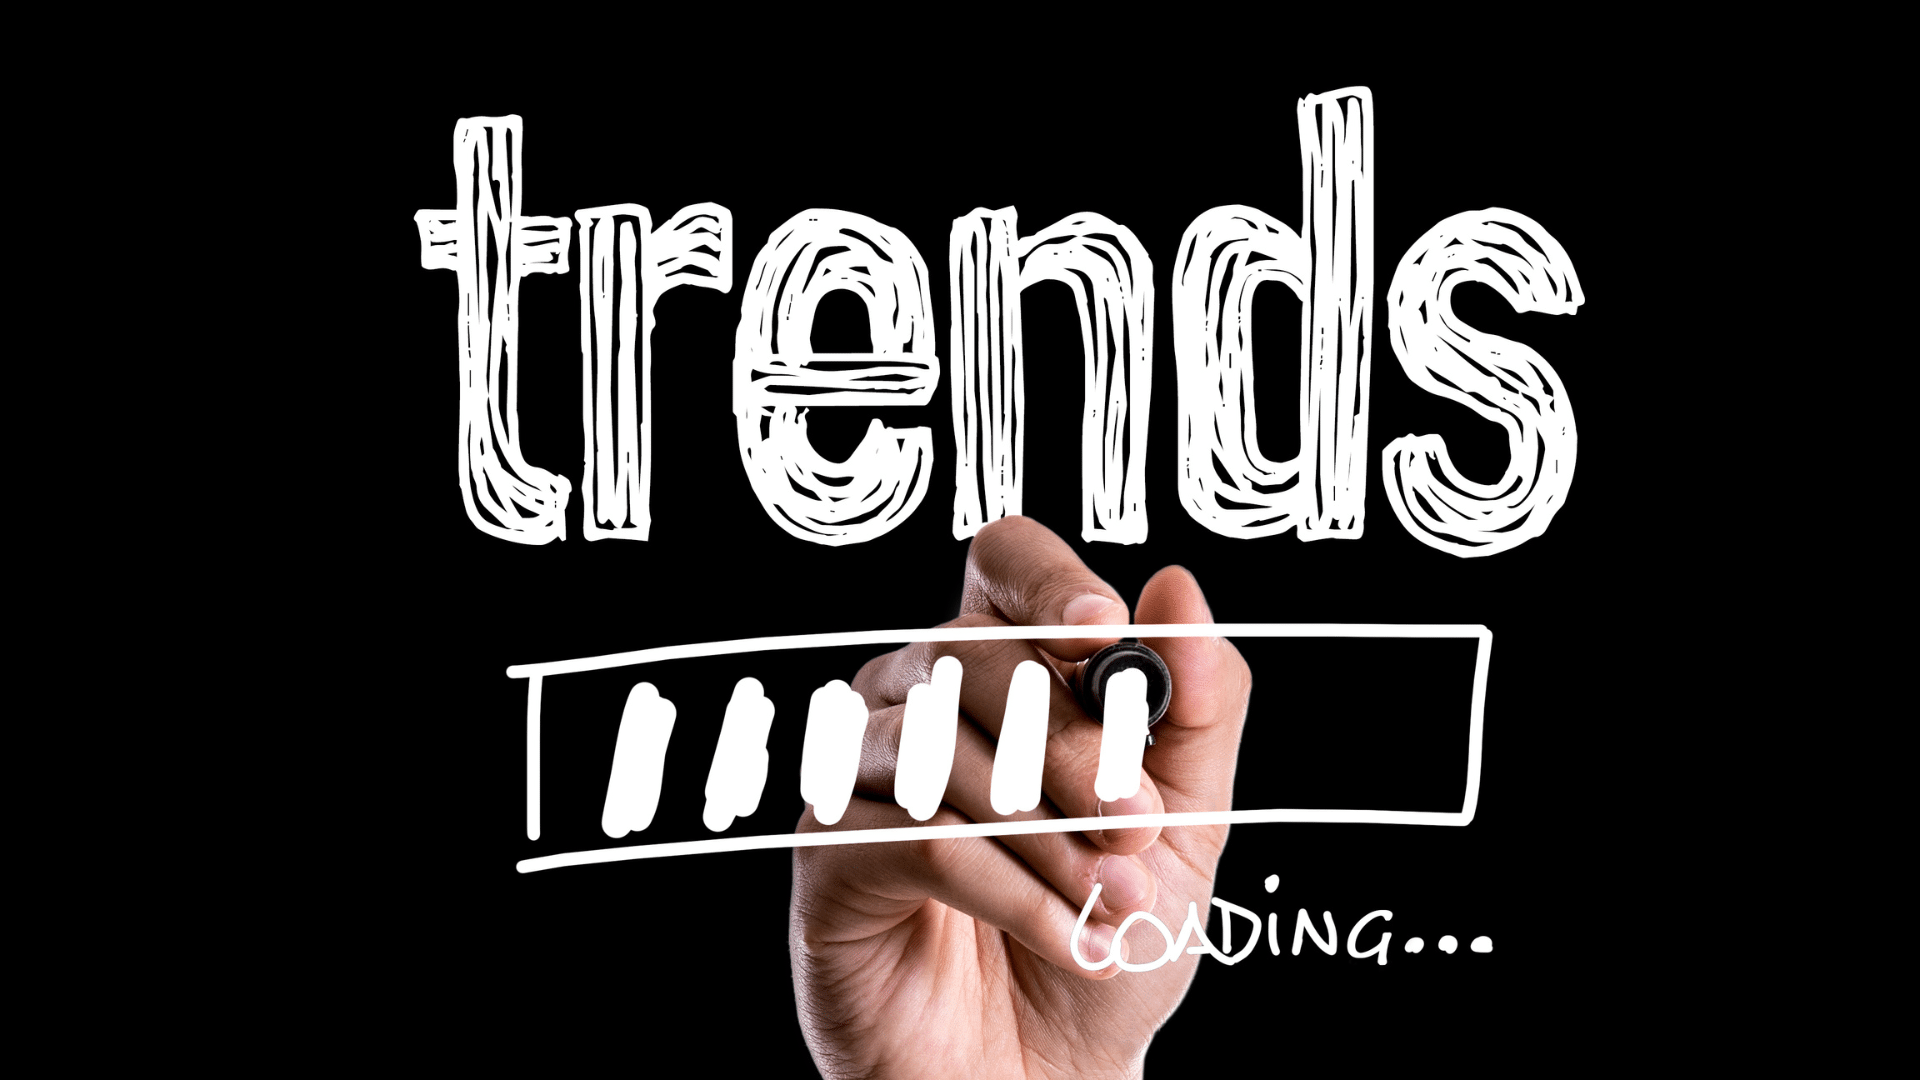 2023 Event Trends